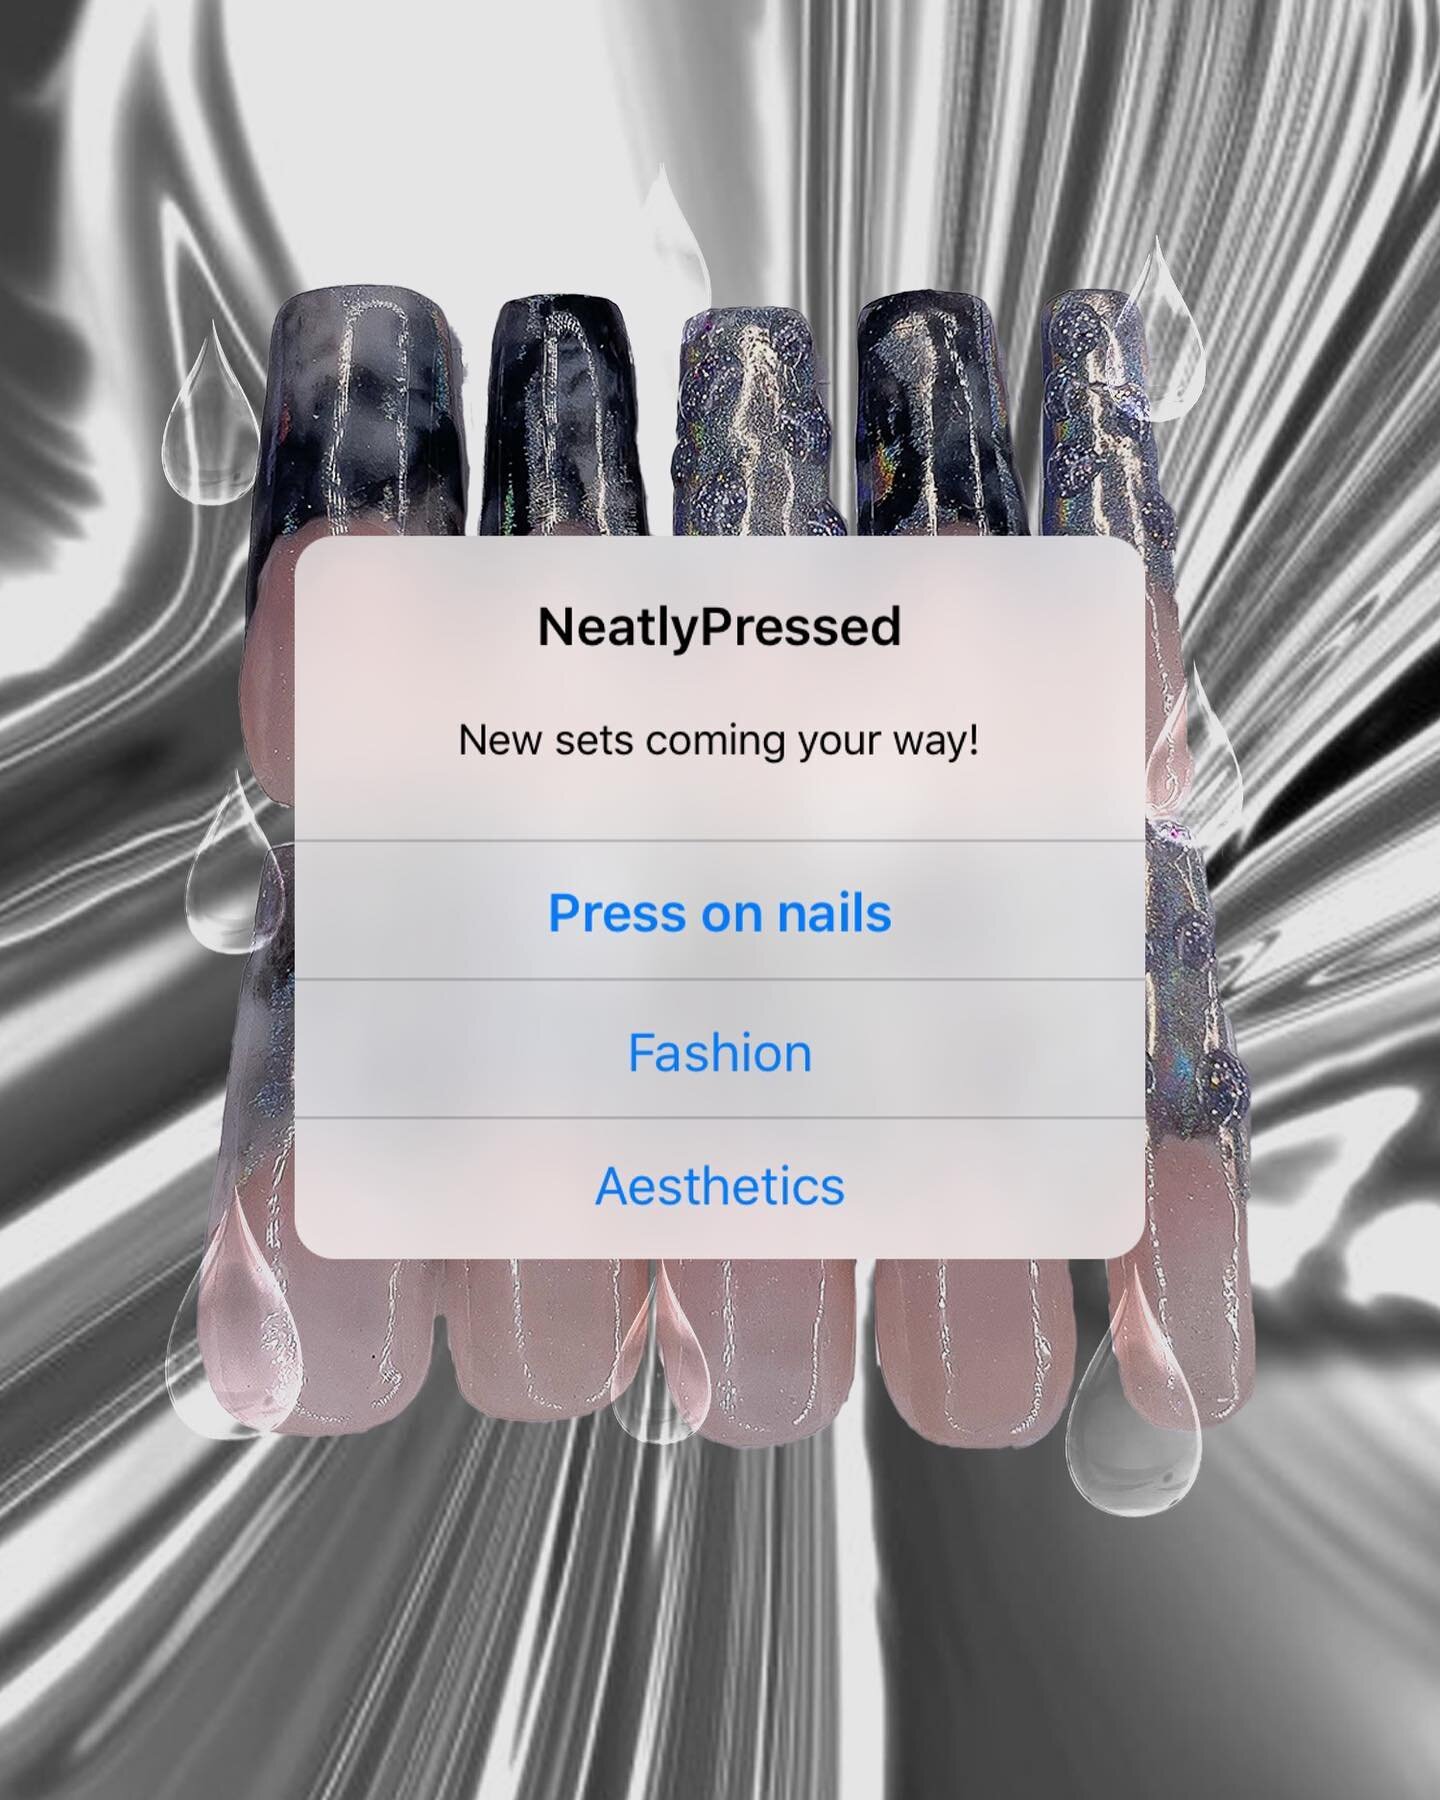 I&rsquo;ve been on a long hiatus, but I&rsquo;m back and getting right into it. NeatlyPressed is coming back with a new look and definitely some new and better sets. For al of my people that are tired of acrylics nails and the damages they cause, I g